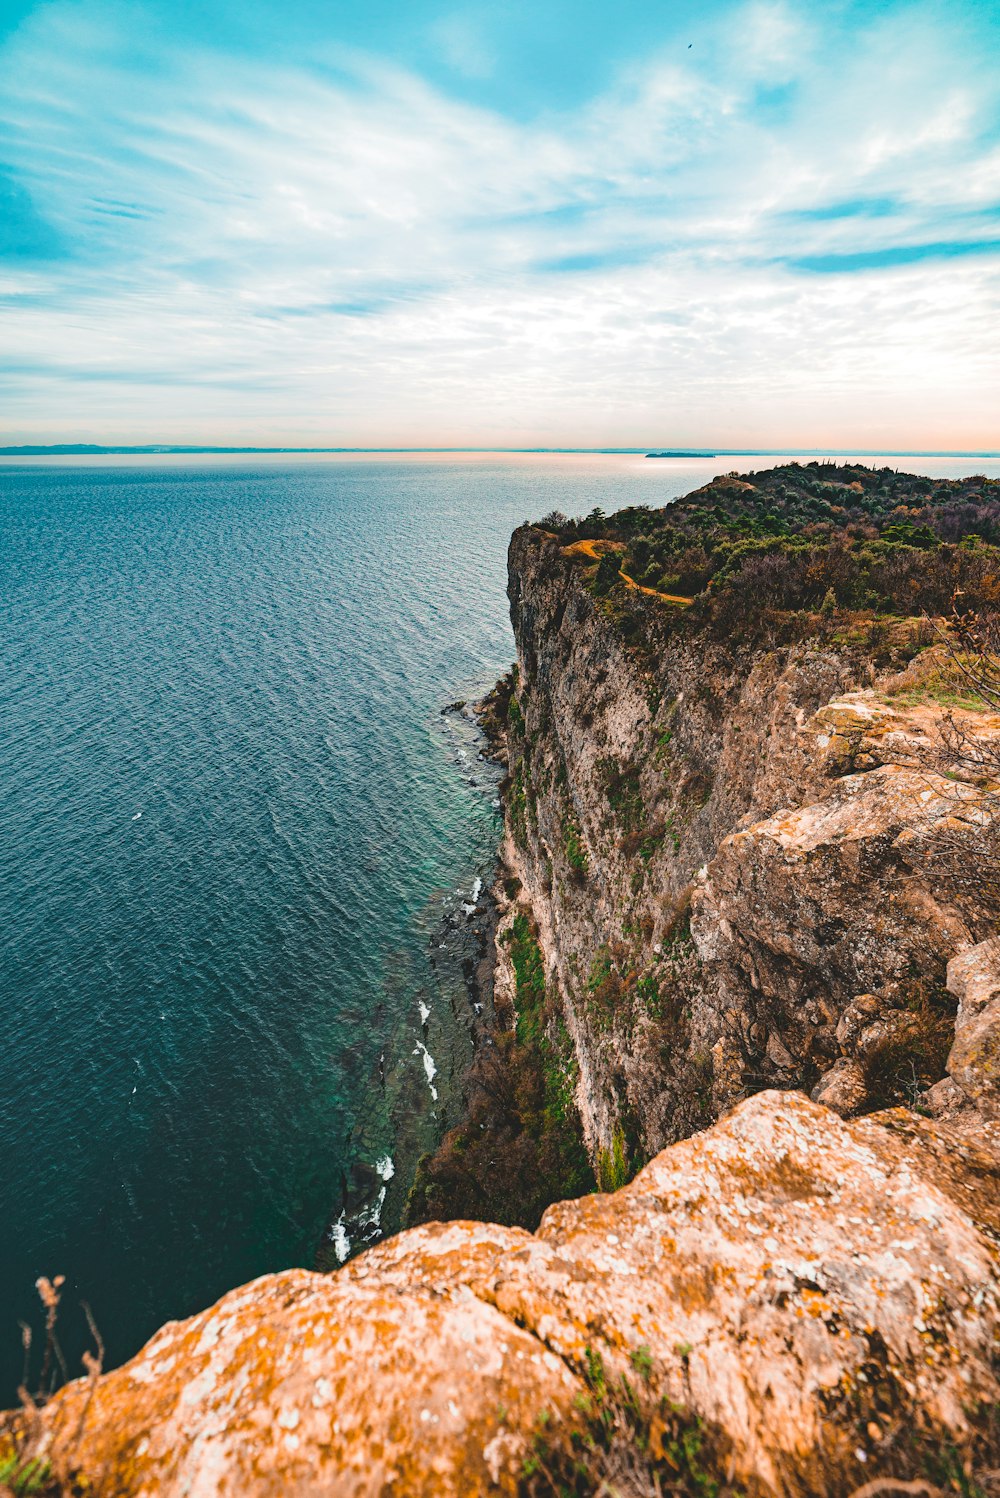 a view of the ocean from the top of a cliff